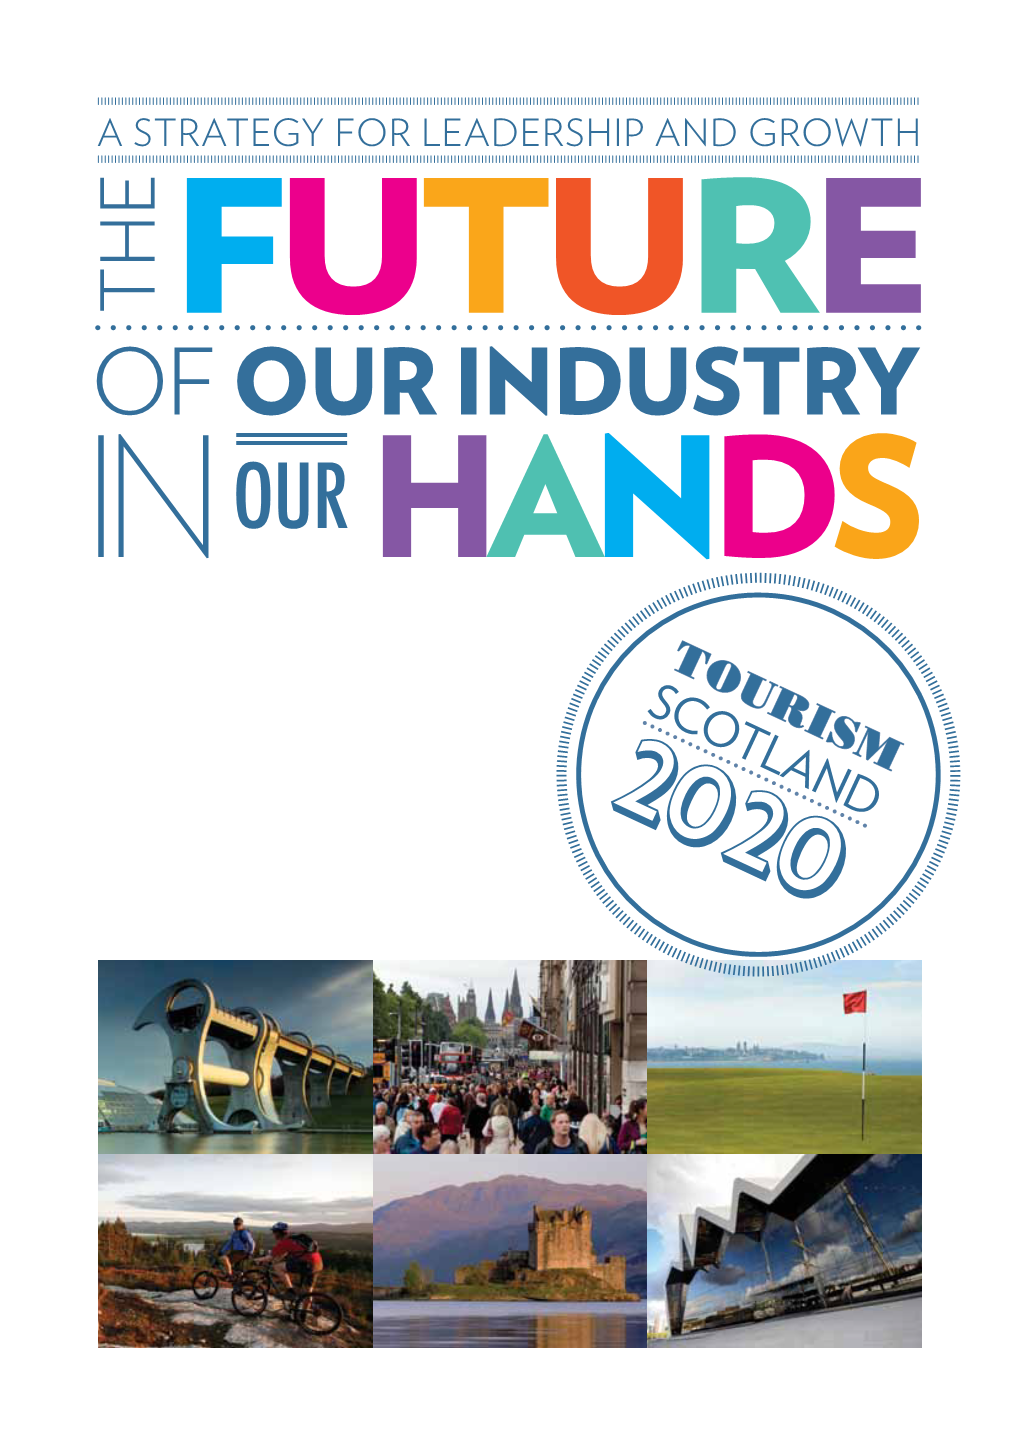 Of Our Industry in Our Hands Tourism Scotland 2020 Authentic Visitor Experiences